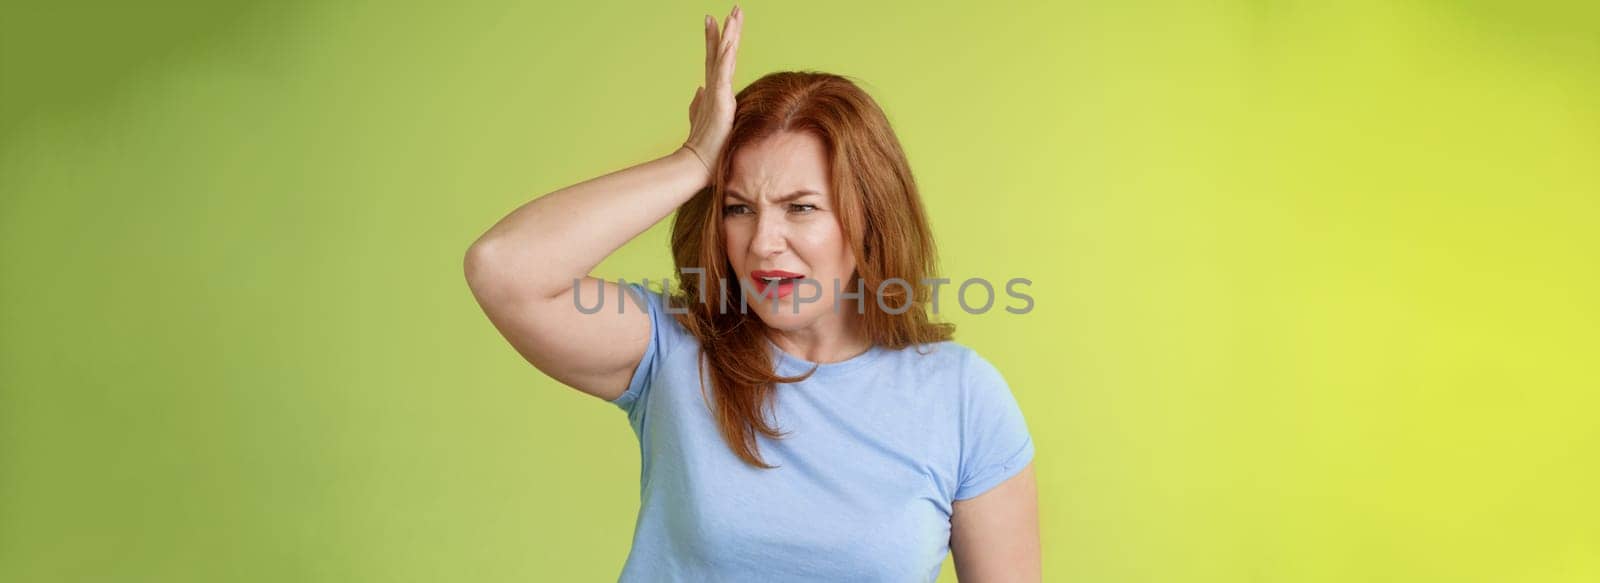 Something important slip my mind. Concerned worried upset redhead mature woman punch forehead turn away frustrated frowning disappointed forget cancel appointment stand green background.